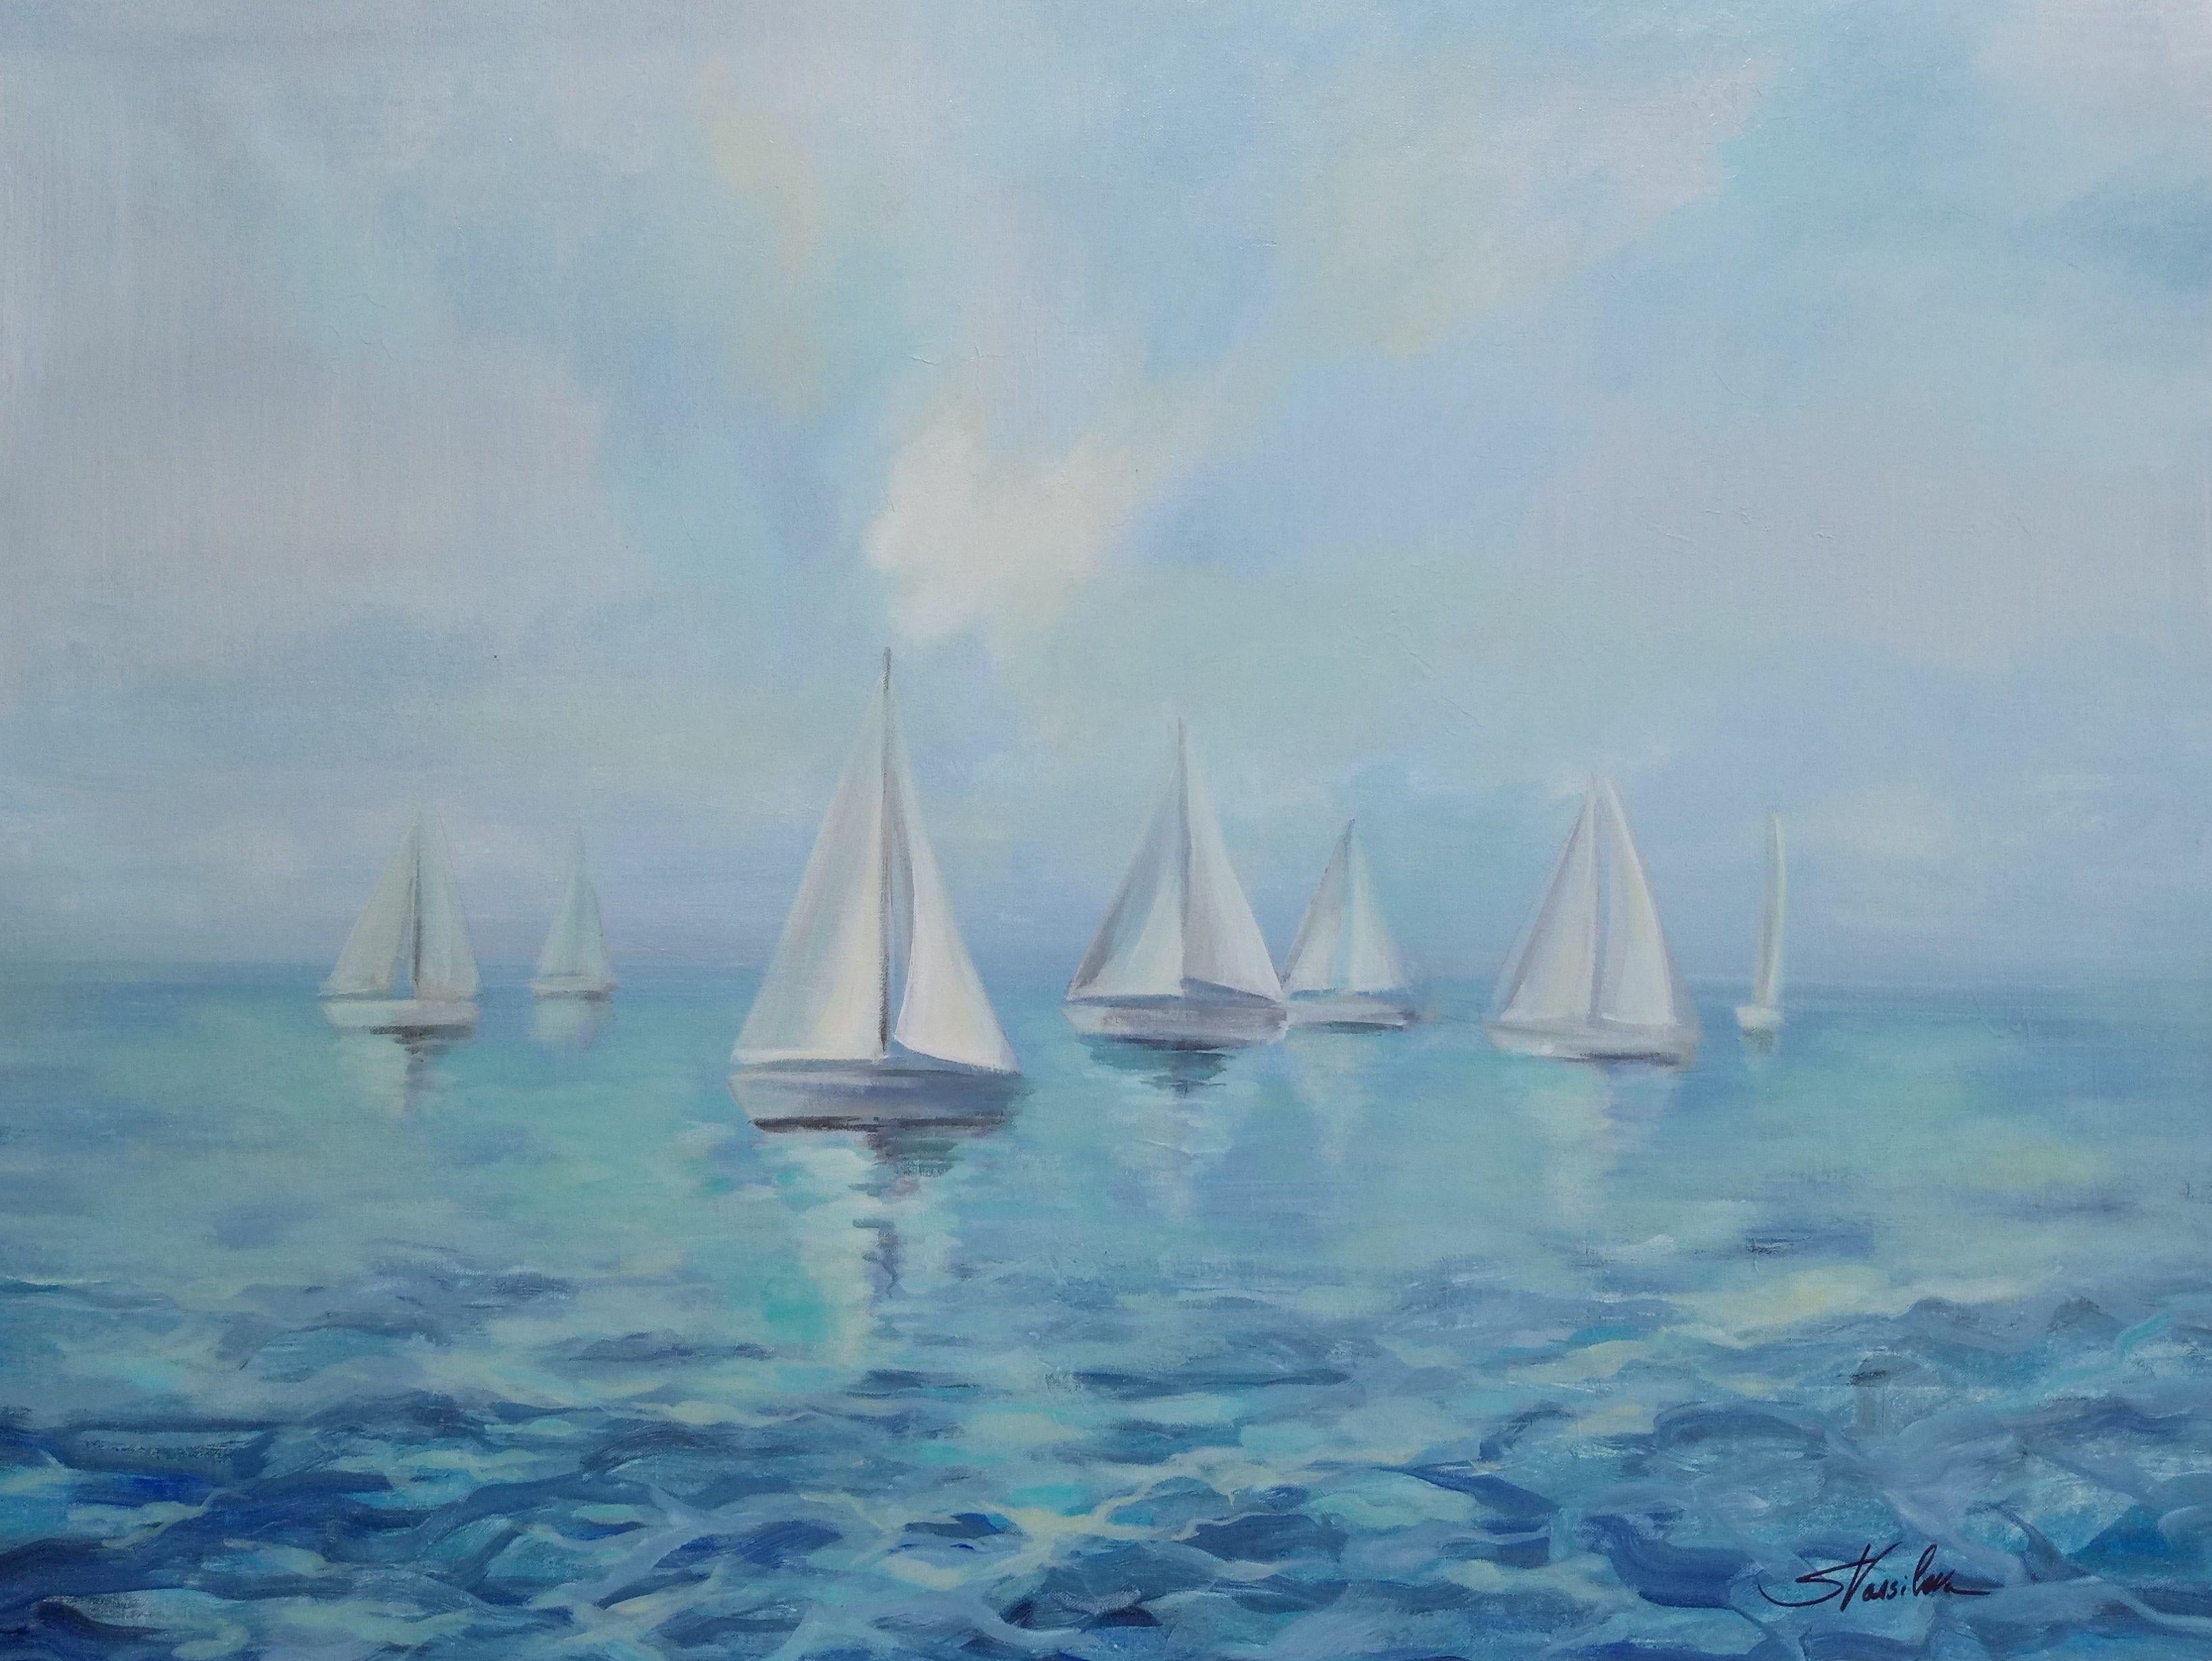 Boats in Haze is a large marine painting, inspired by the beauty of the sea in a foggy morning. The soft light and pale colors are distressed and blended, expressing the marine layer. The palette is limited blue and white. The focus is on the boats